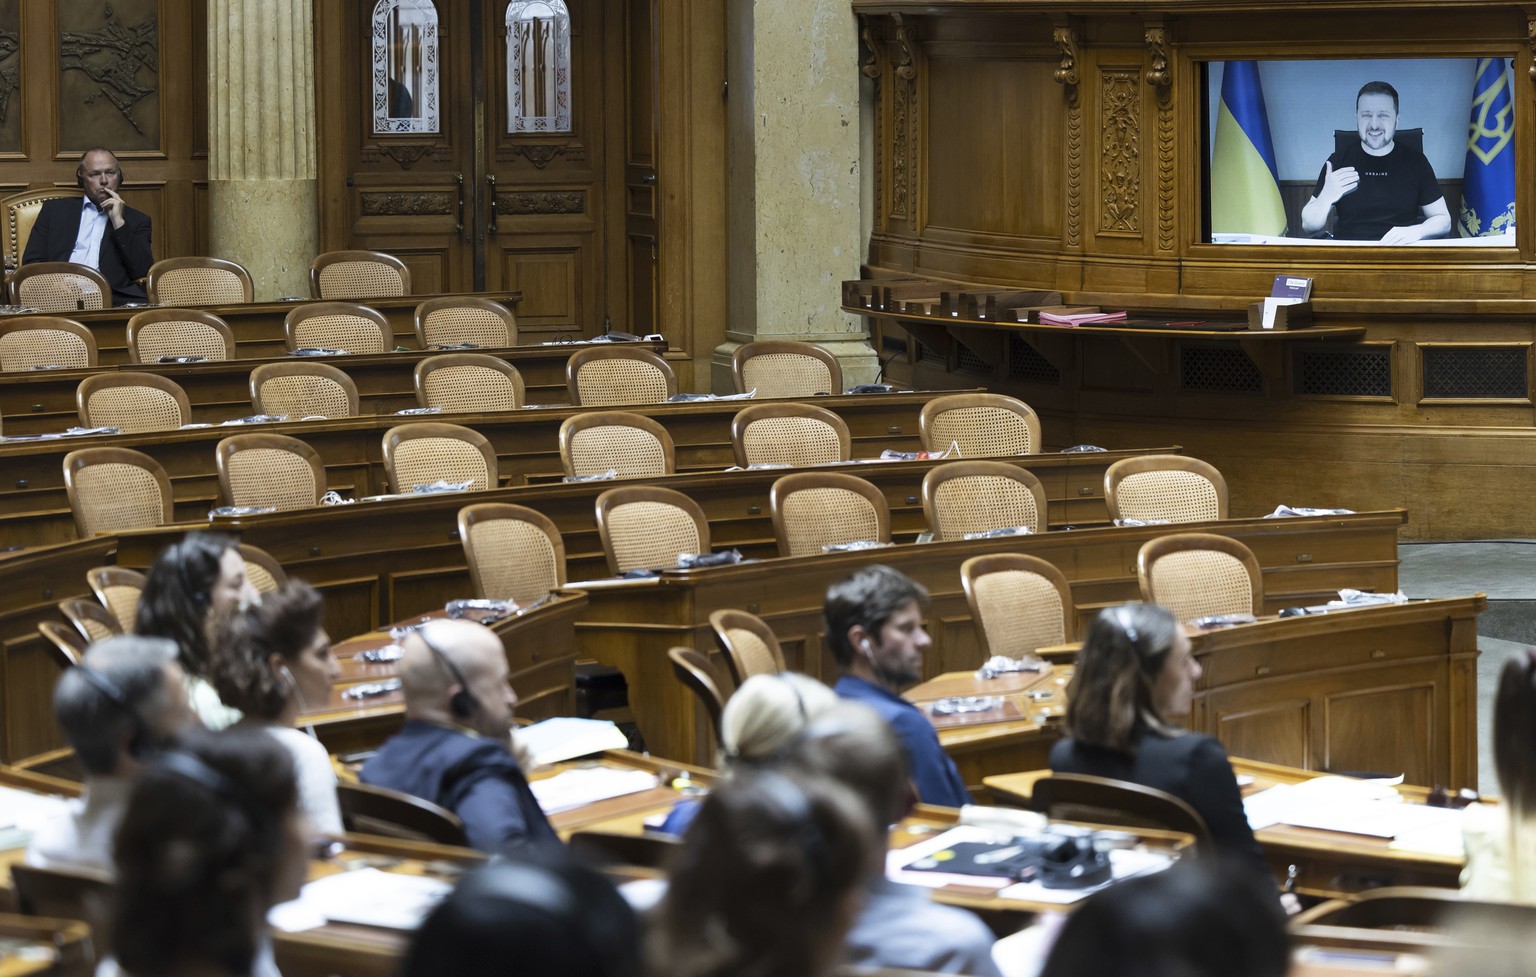 Ukrainian President Volodymyr Zelenskyy is displayed on a screen in front of the empty seats of the members of the right wing party SVP during his speech to the members of the Swiss parliament in Bern ...